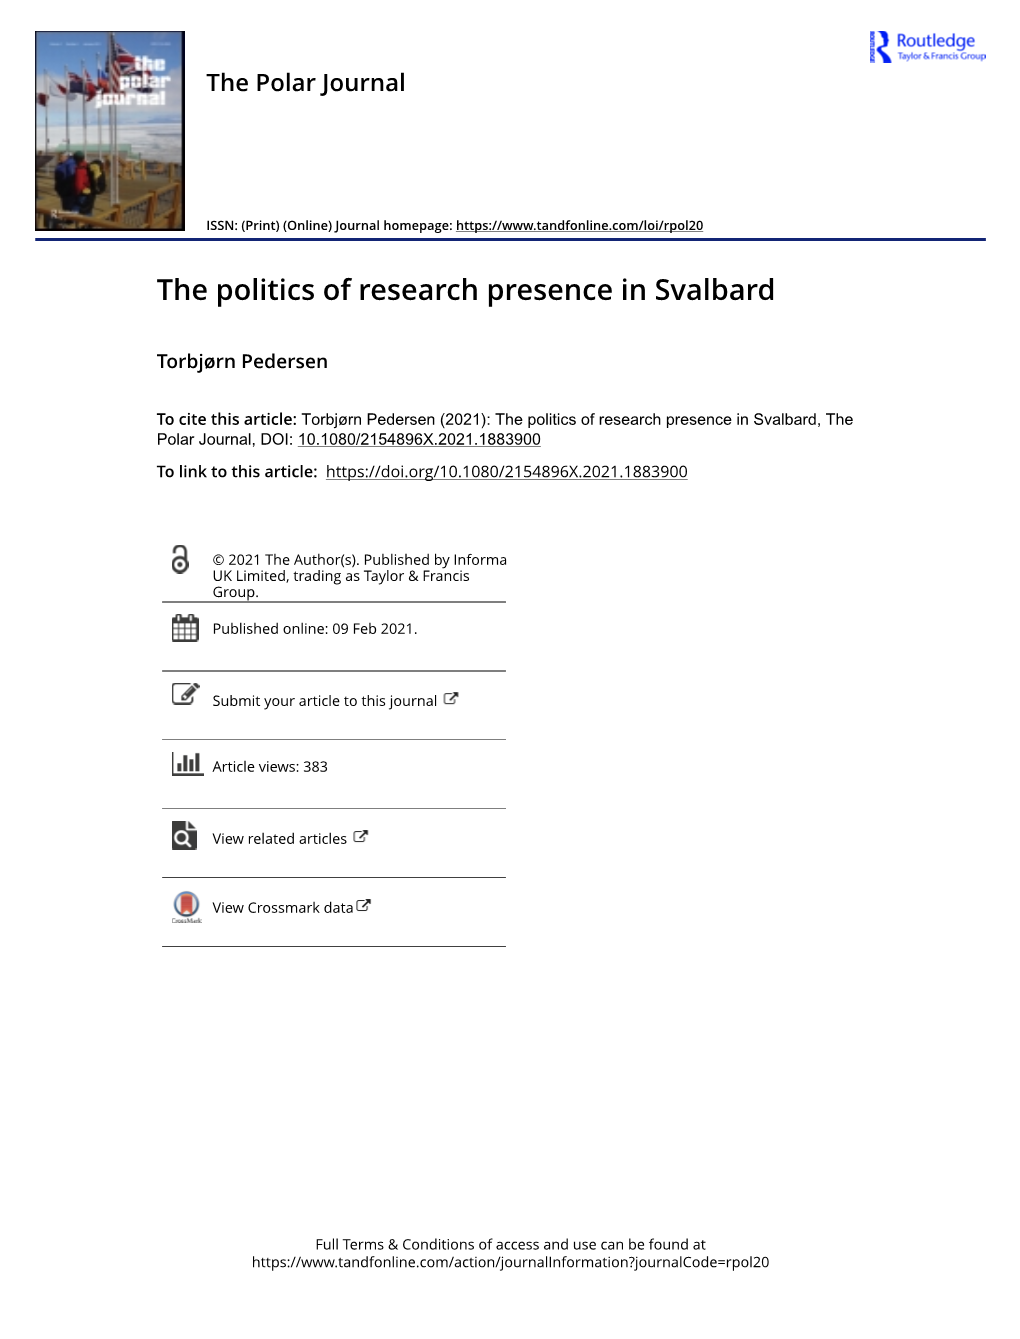 The Politics of Research Presence in Svalbard